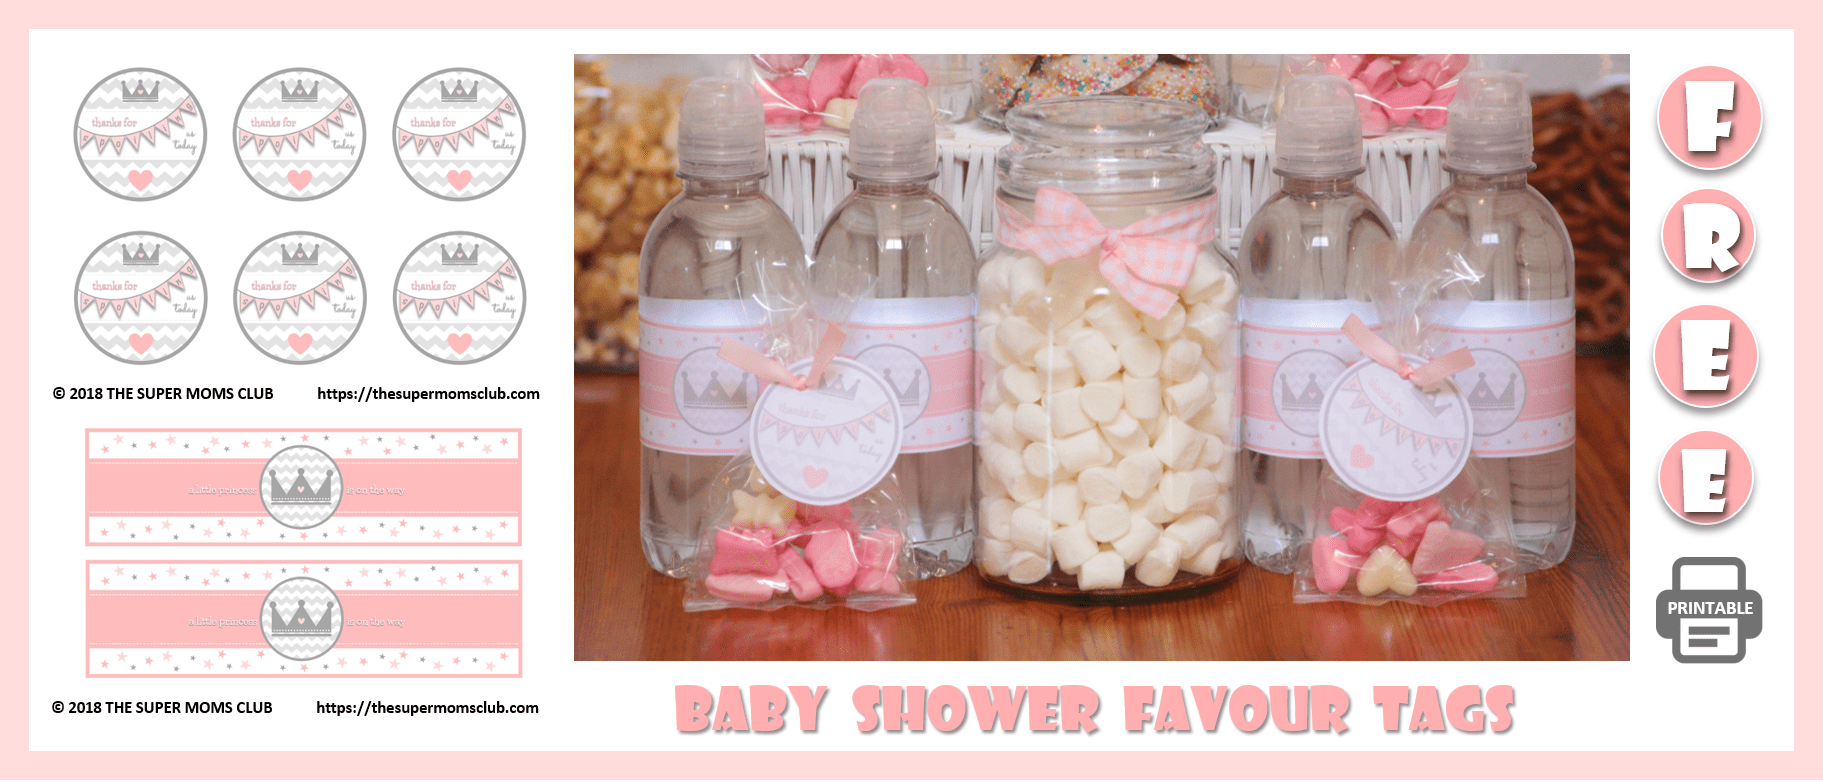 Princess Themed Baby Shower FREE PRINTABLE Favour Tags - The Super Moms Club